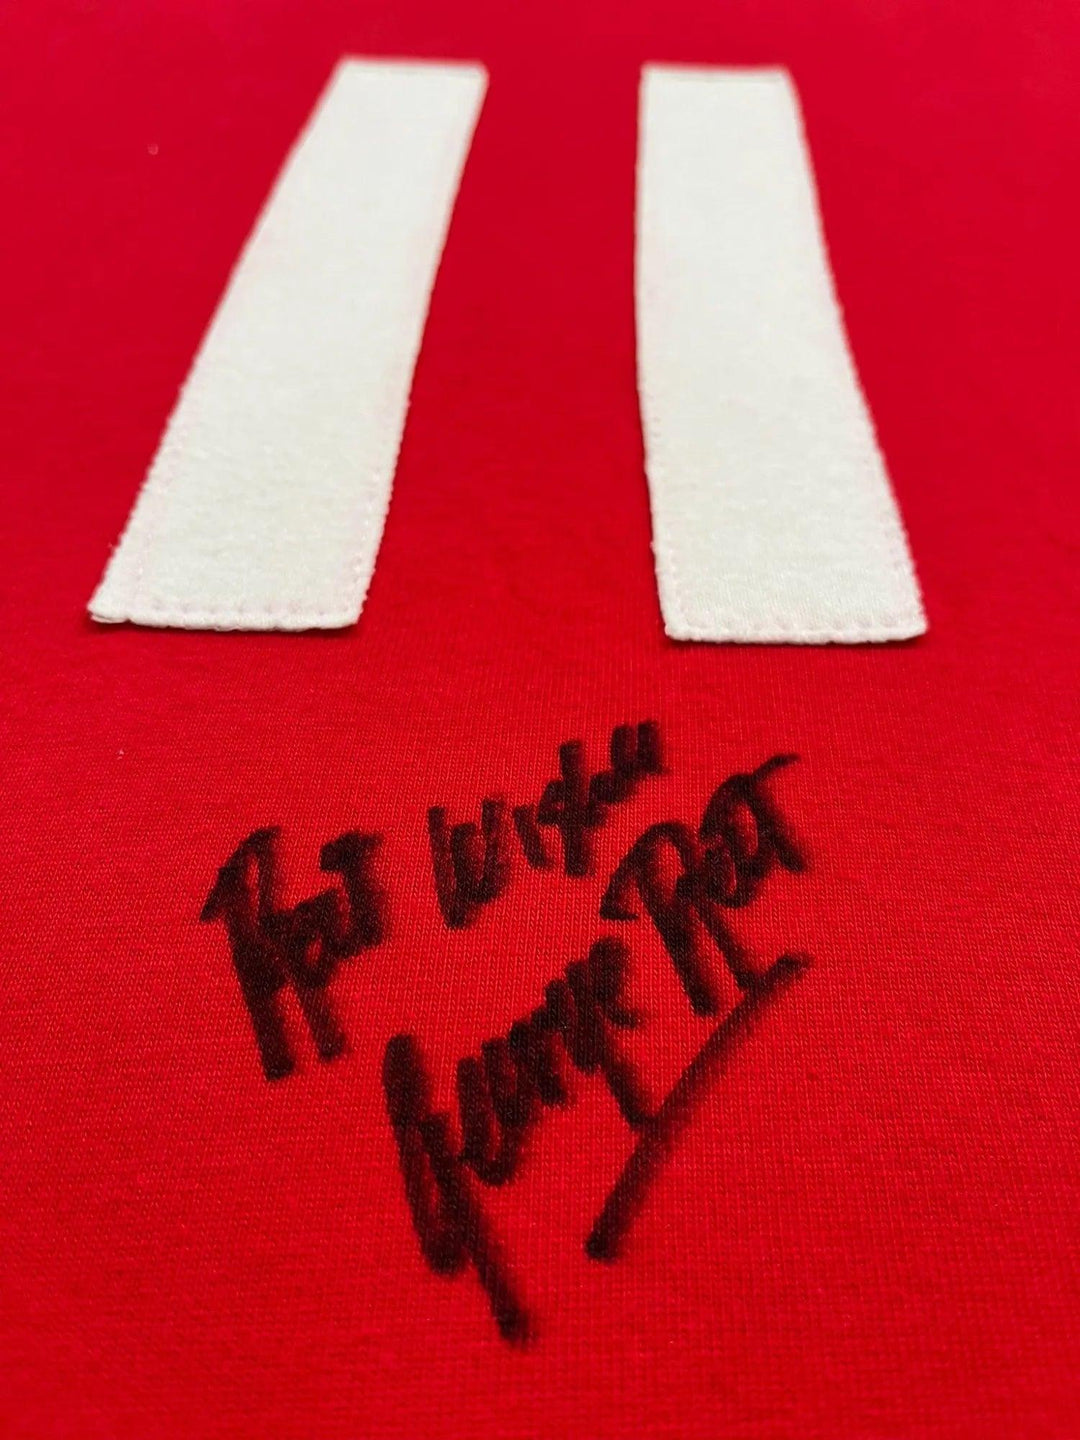 George Best 11 Manchester United 1963-1974 - Signed Soccer Shirt | Firma Stella